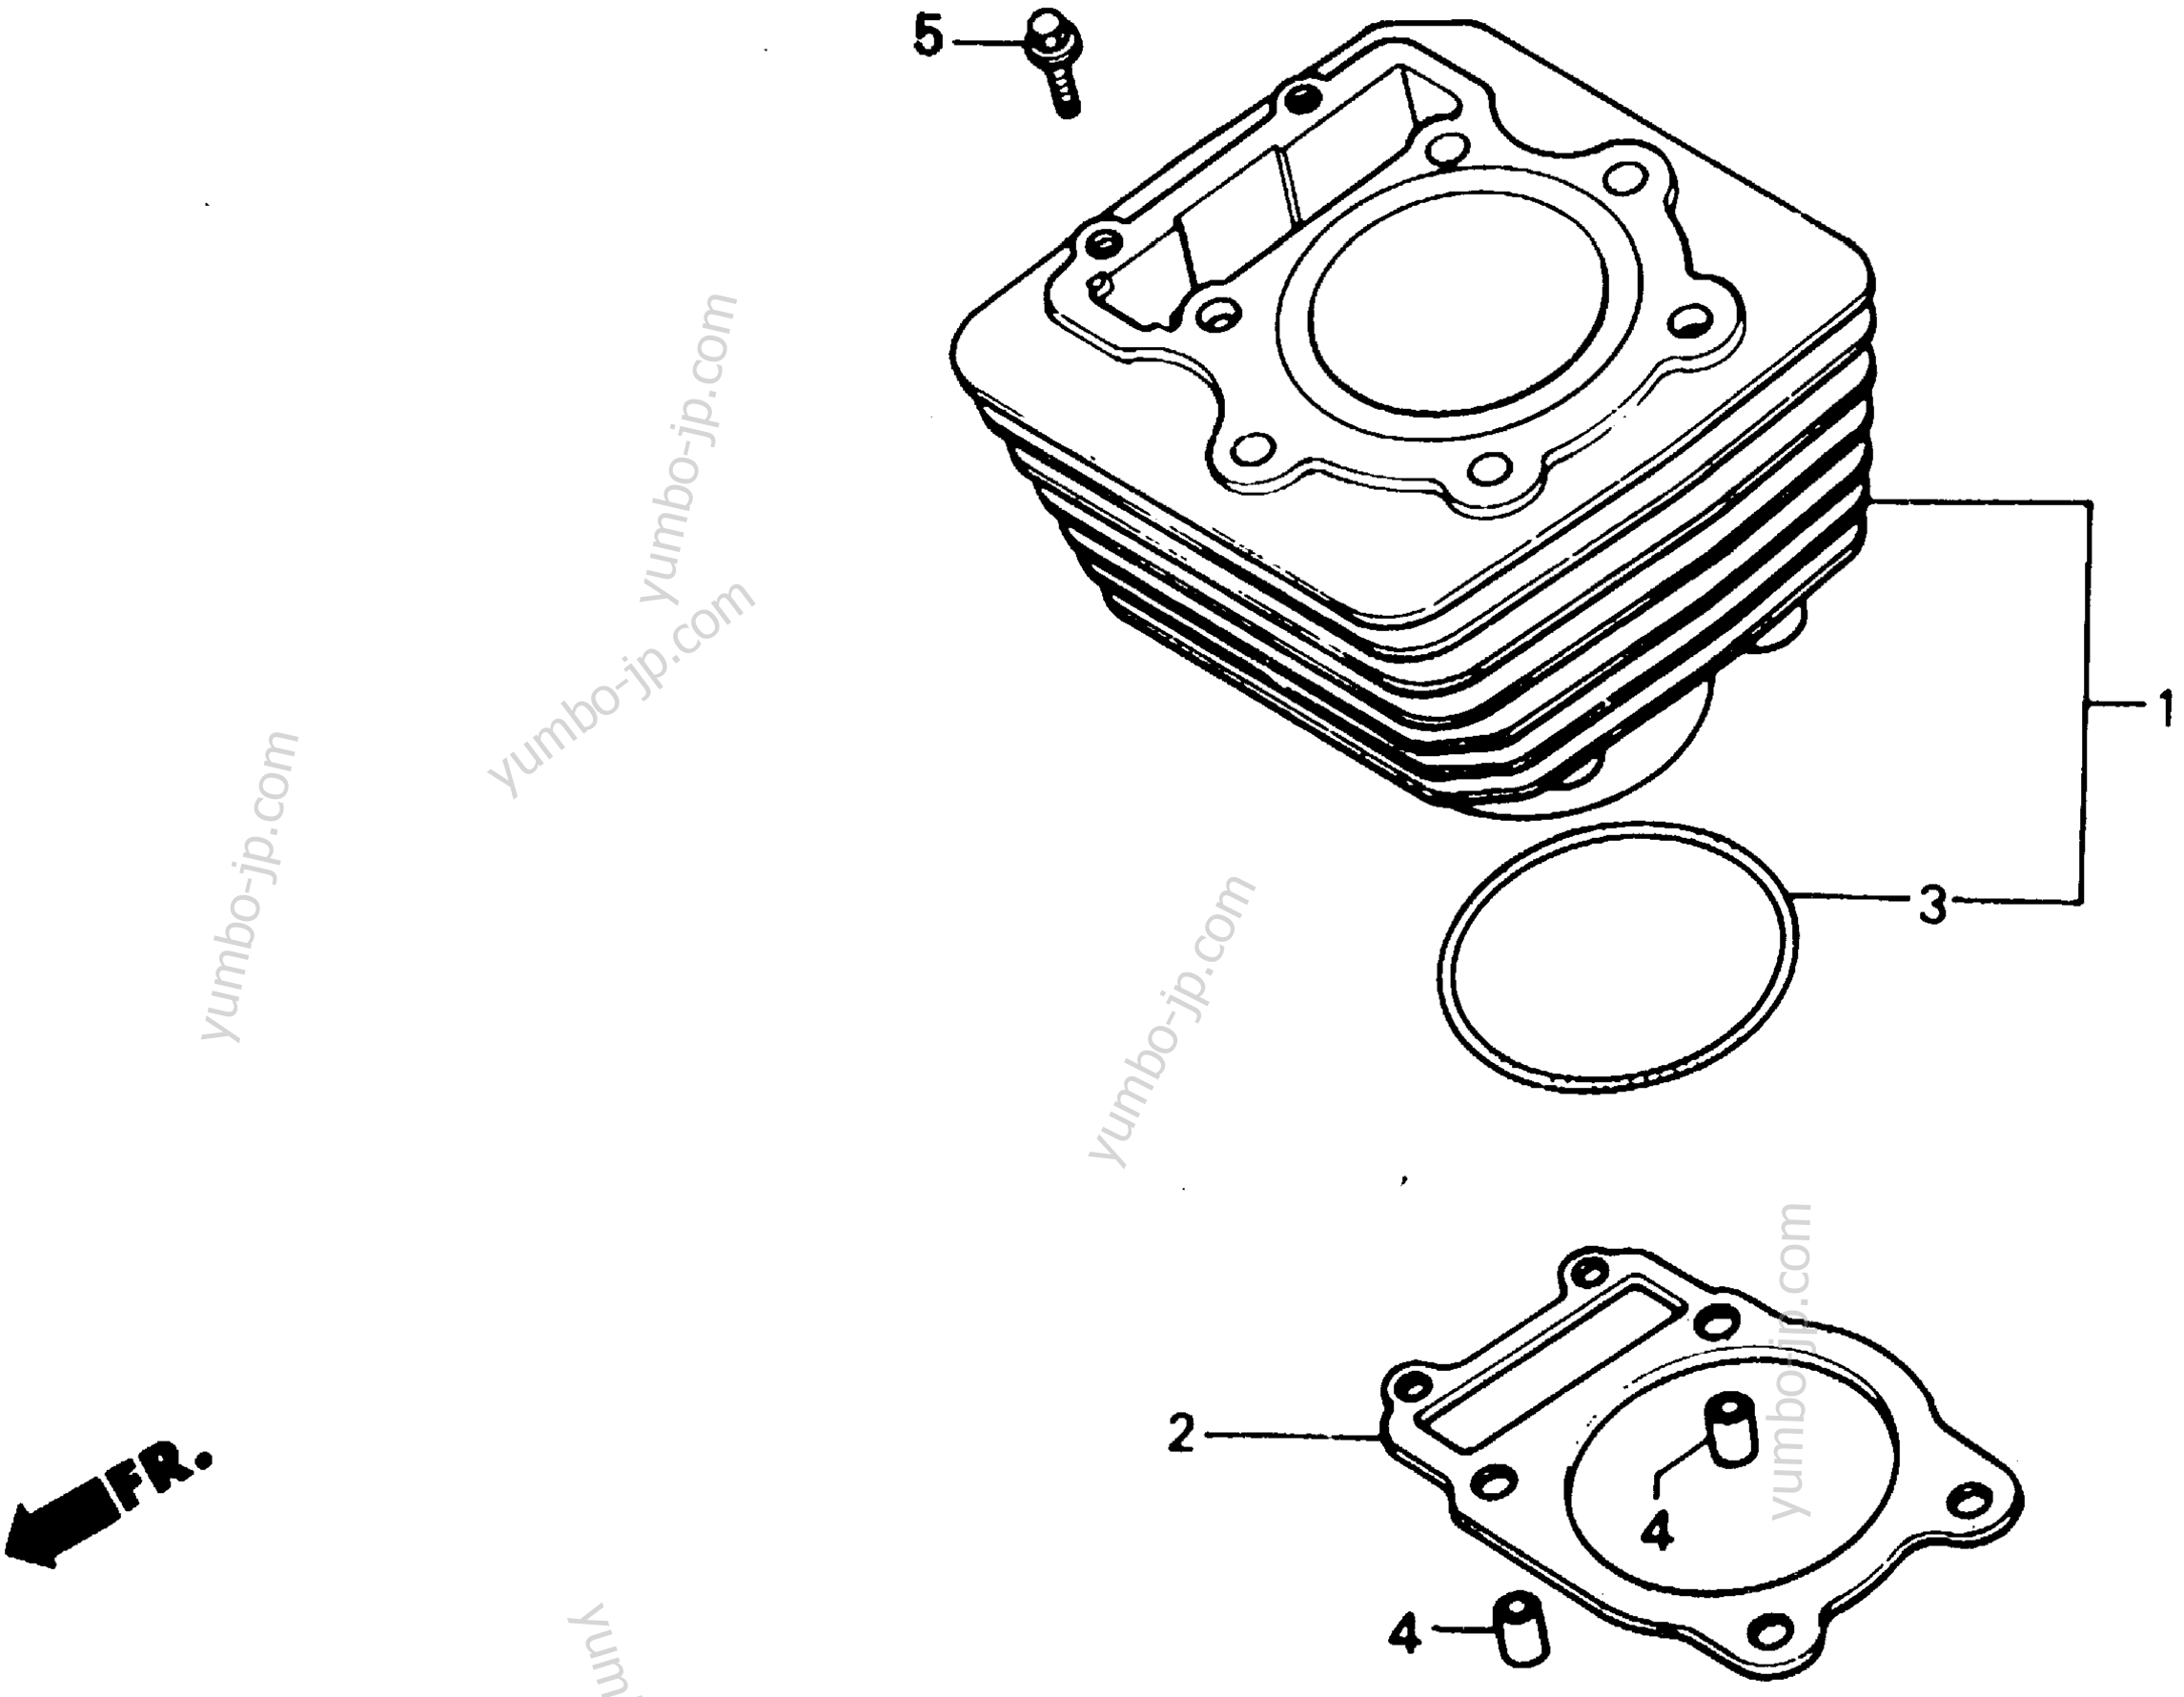 CYLINDER for ATVs HONDA TRX350D A 1988 year